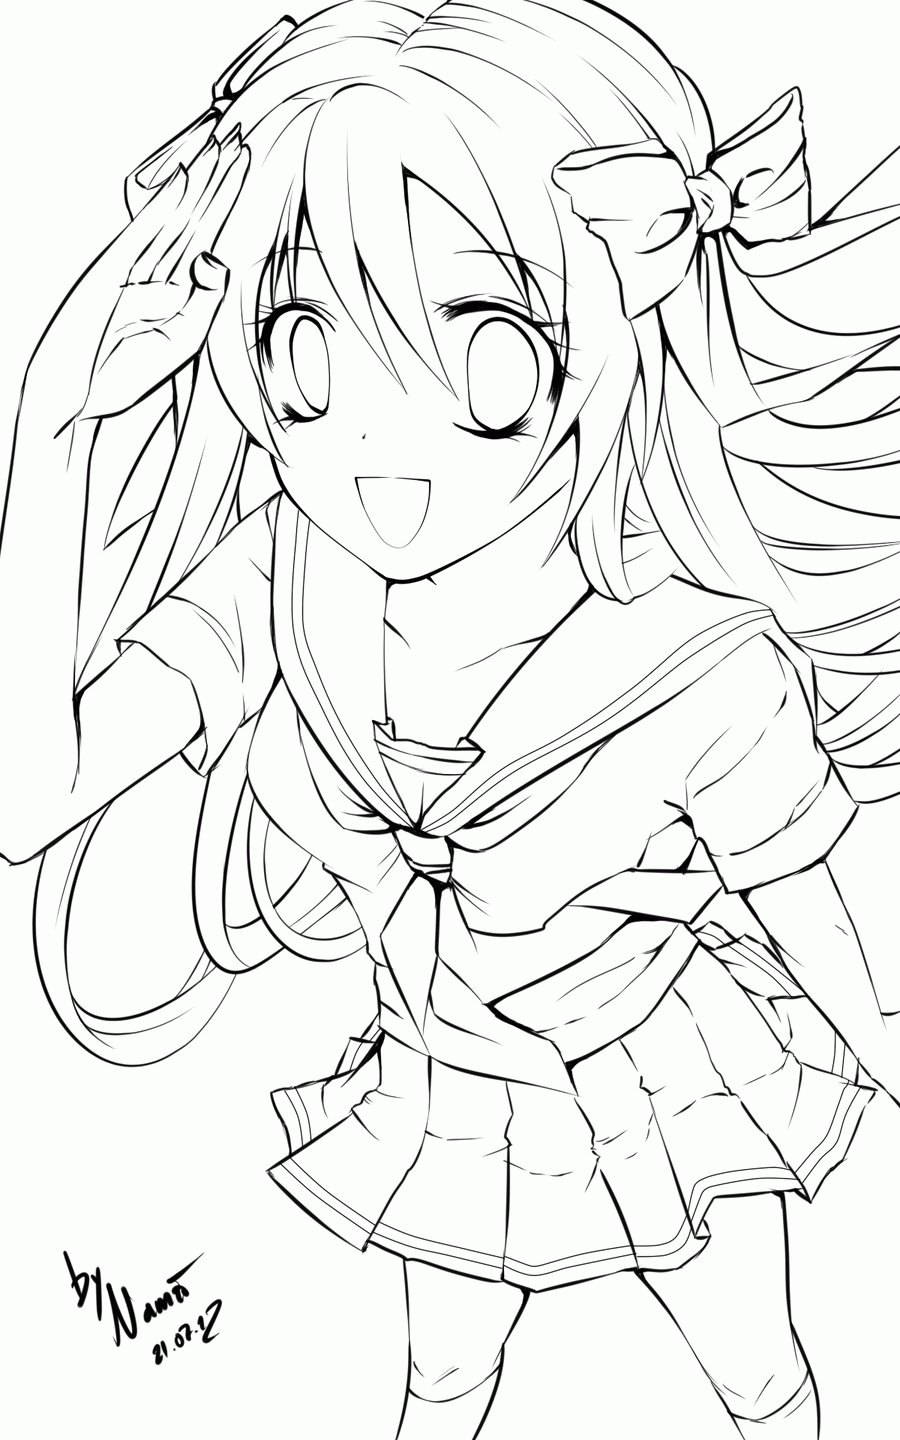 Anime Girls Group Coloring Page   Coloring Home